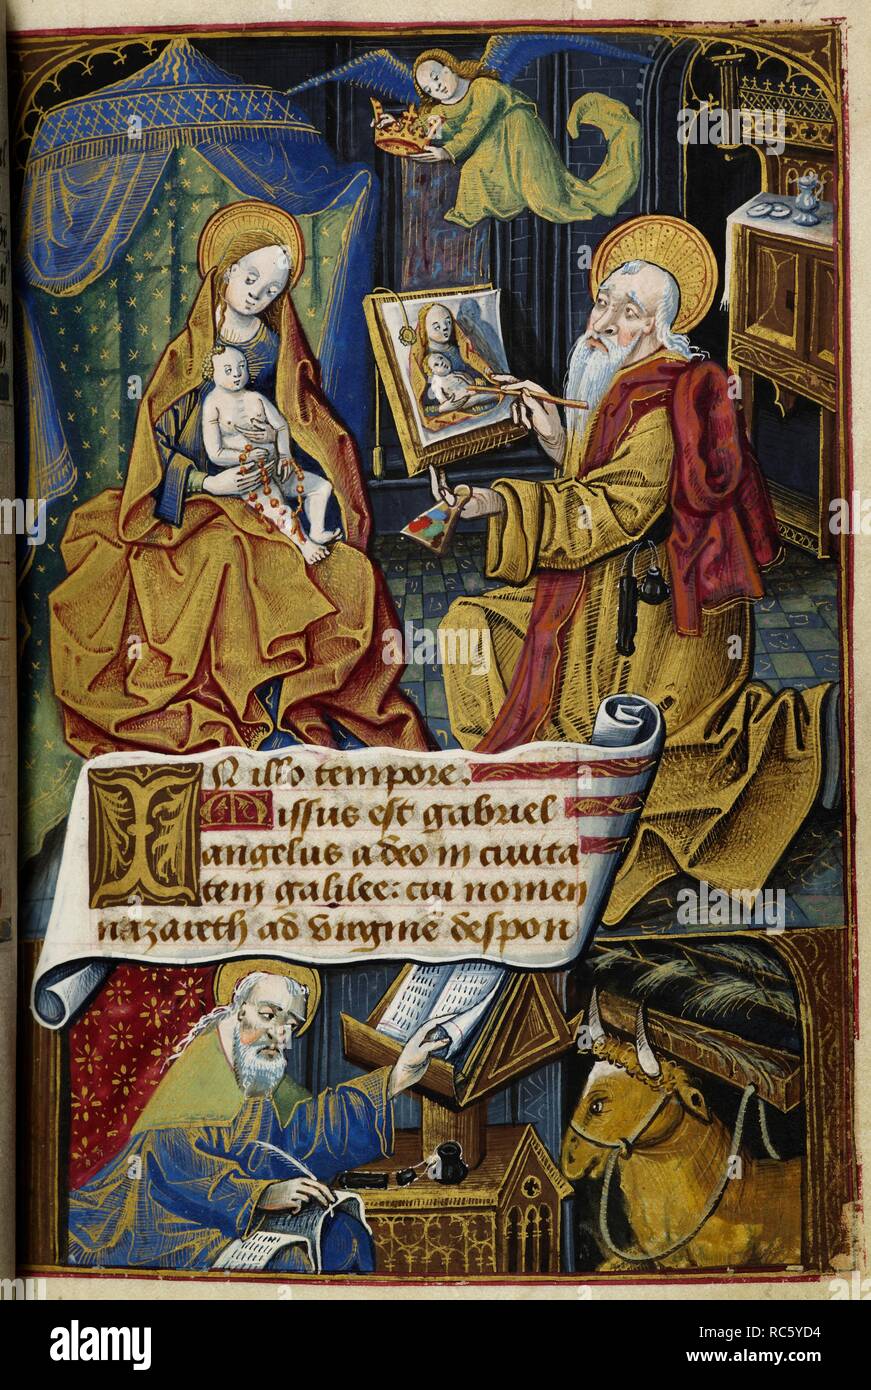 Gospel readings. St Luke painting the Virgin, and below, writing his gospel. Scroll with text, Luke 1, 26-27. Book of Hours. France [Macon?]; end of 15th century. Source: Add. 20694, f.14. Language: Latin. Stock Photo